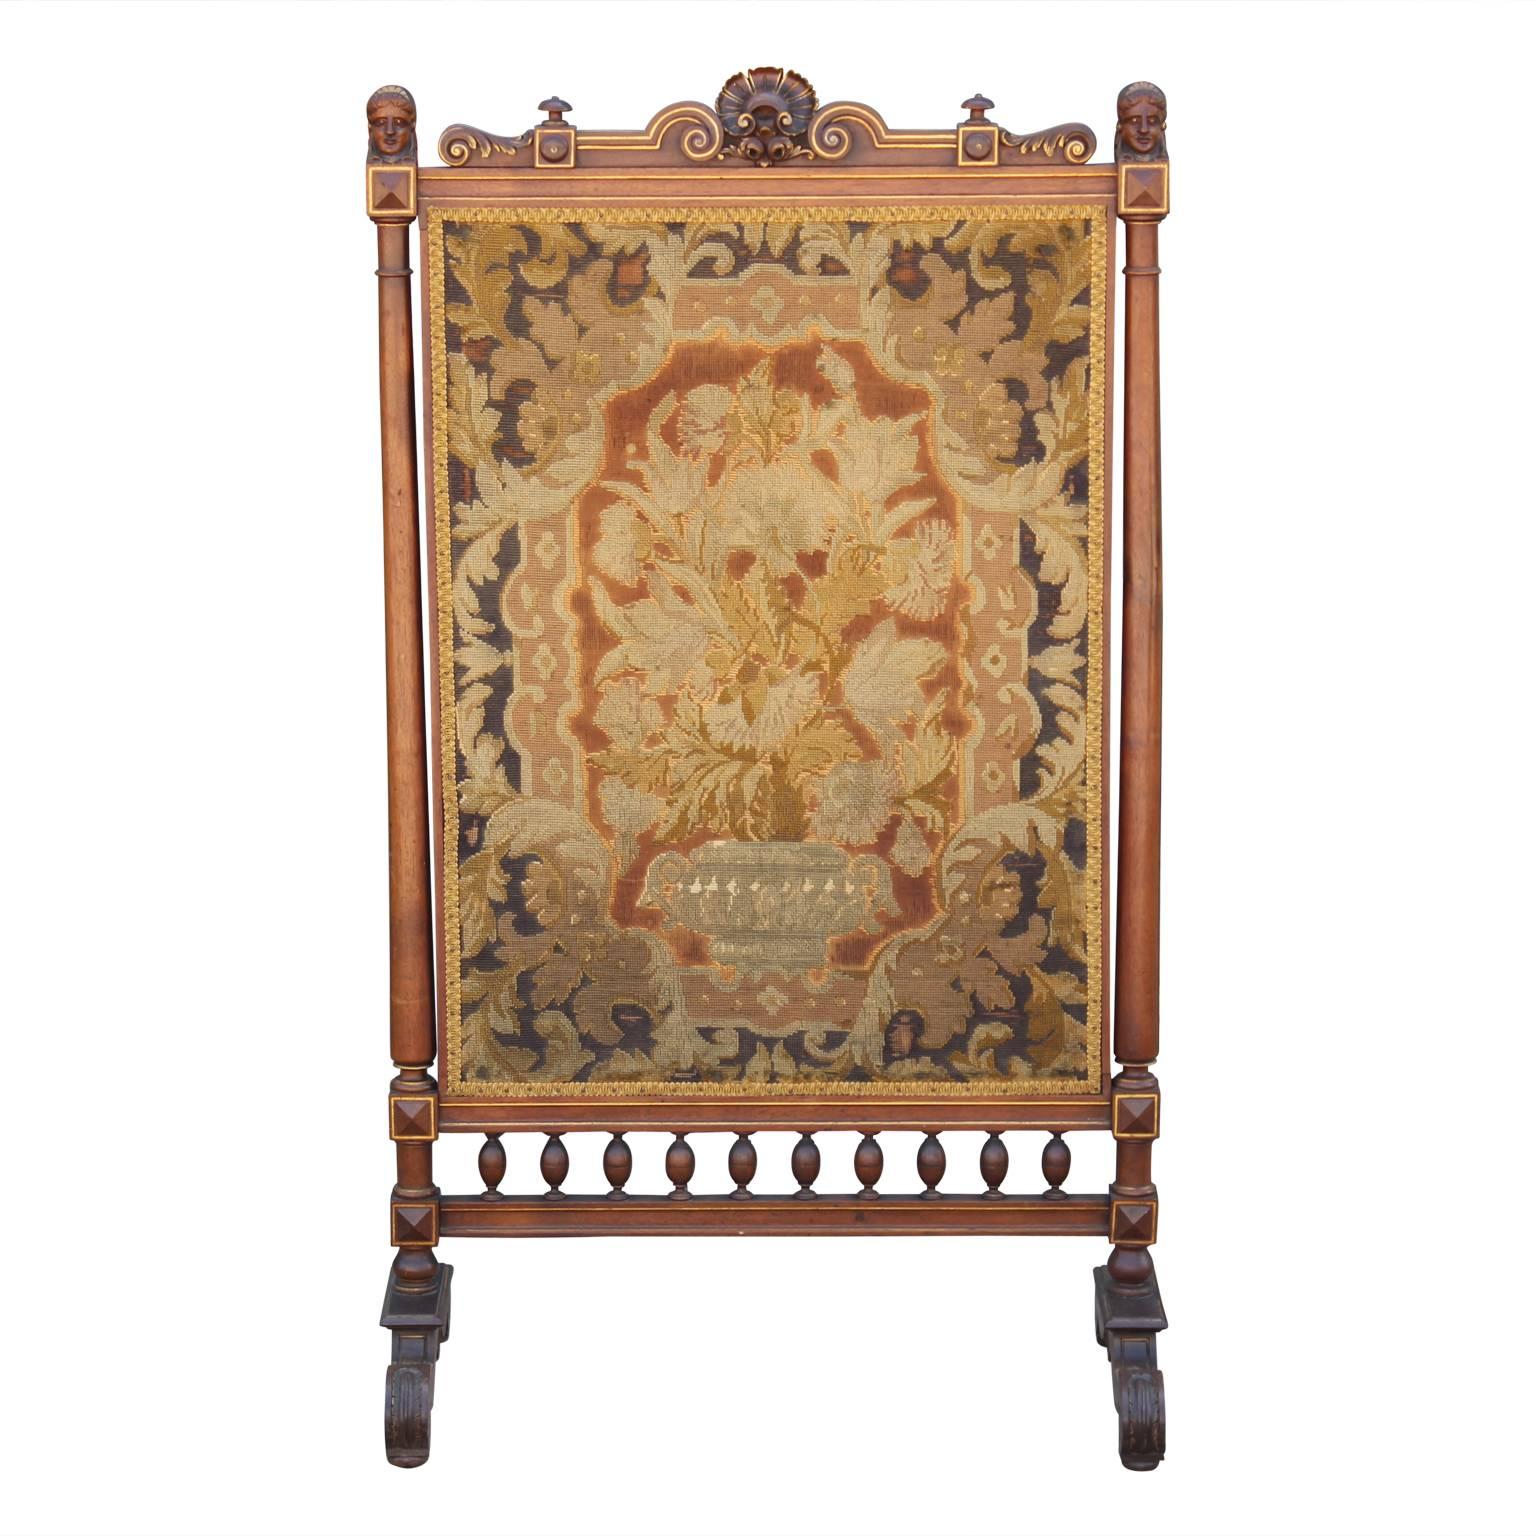 Turn of the century antique French tapestry fireplace screen.